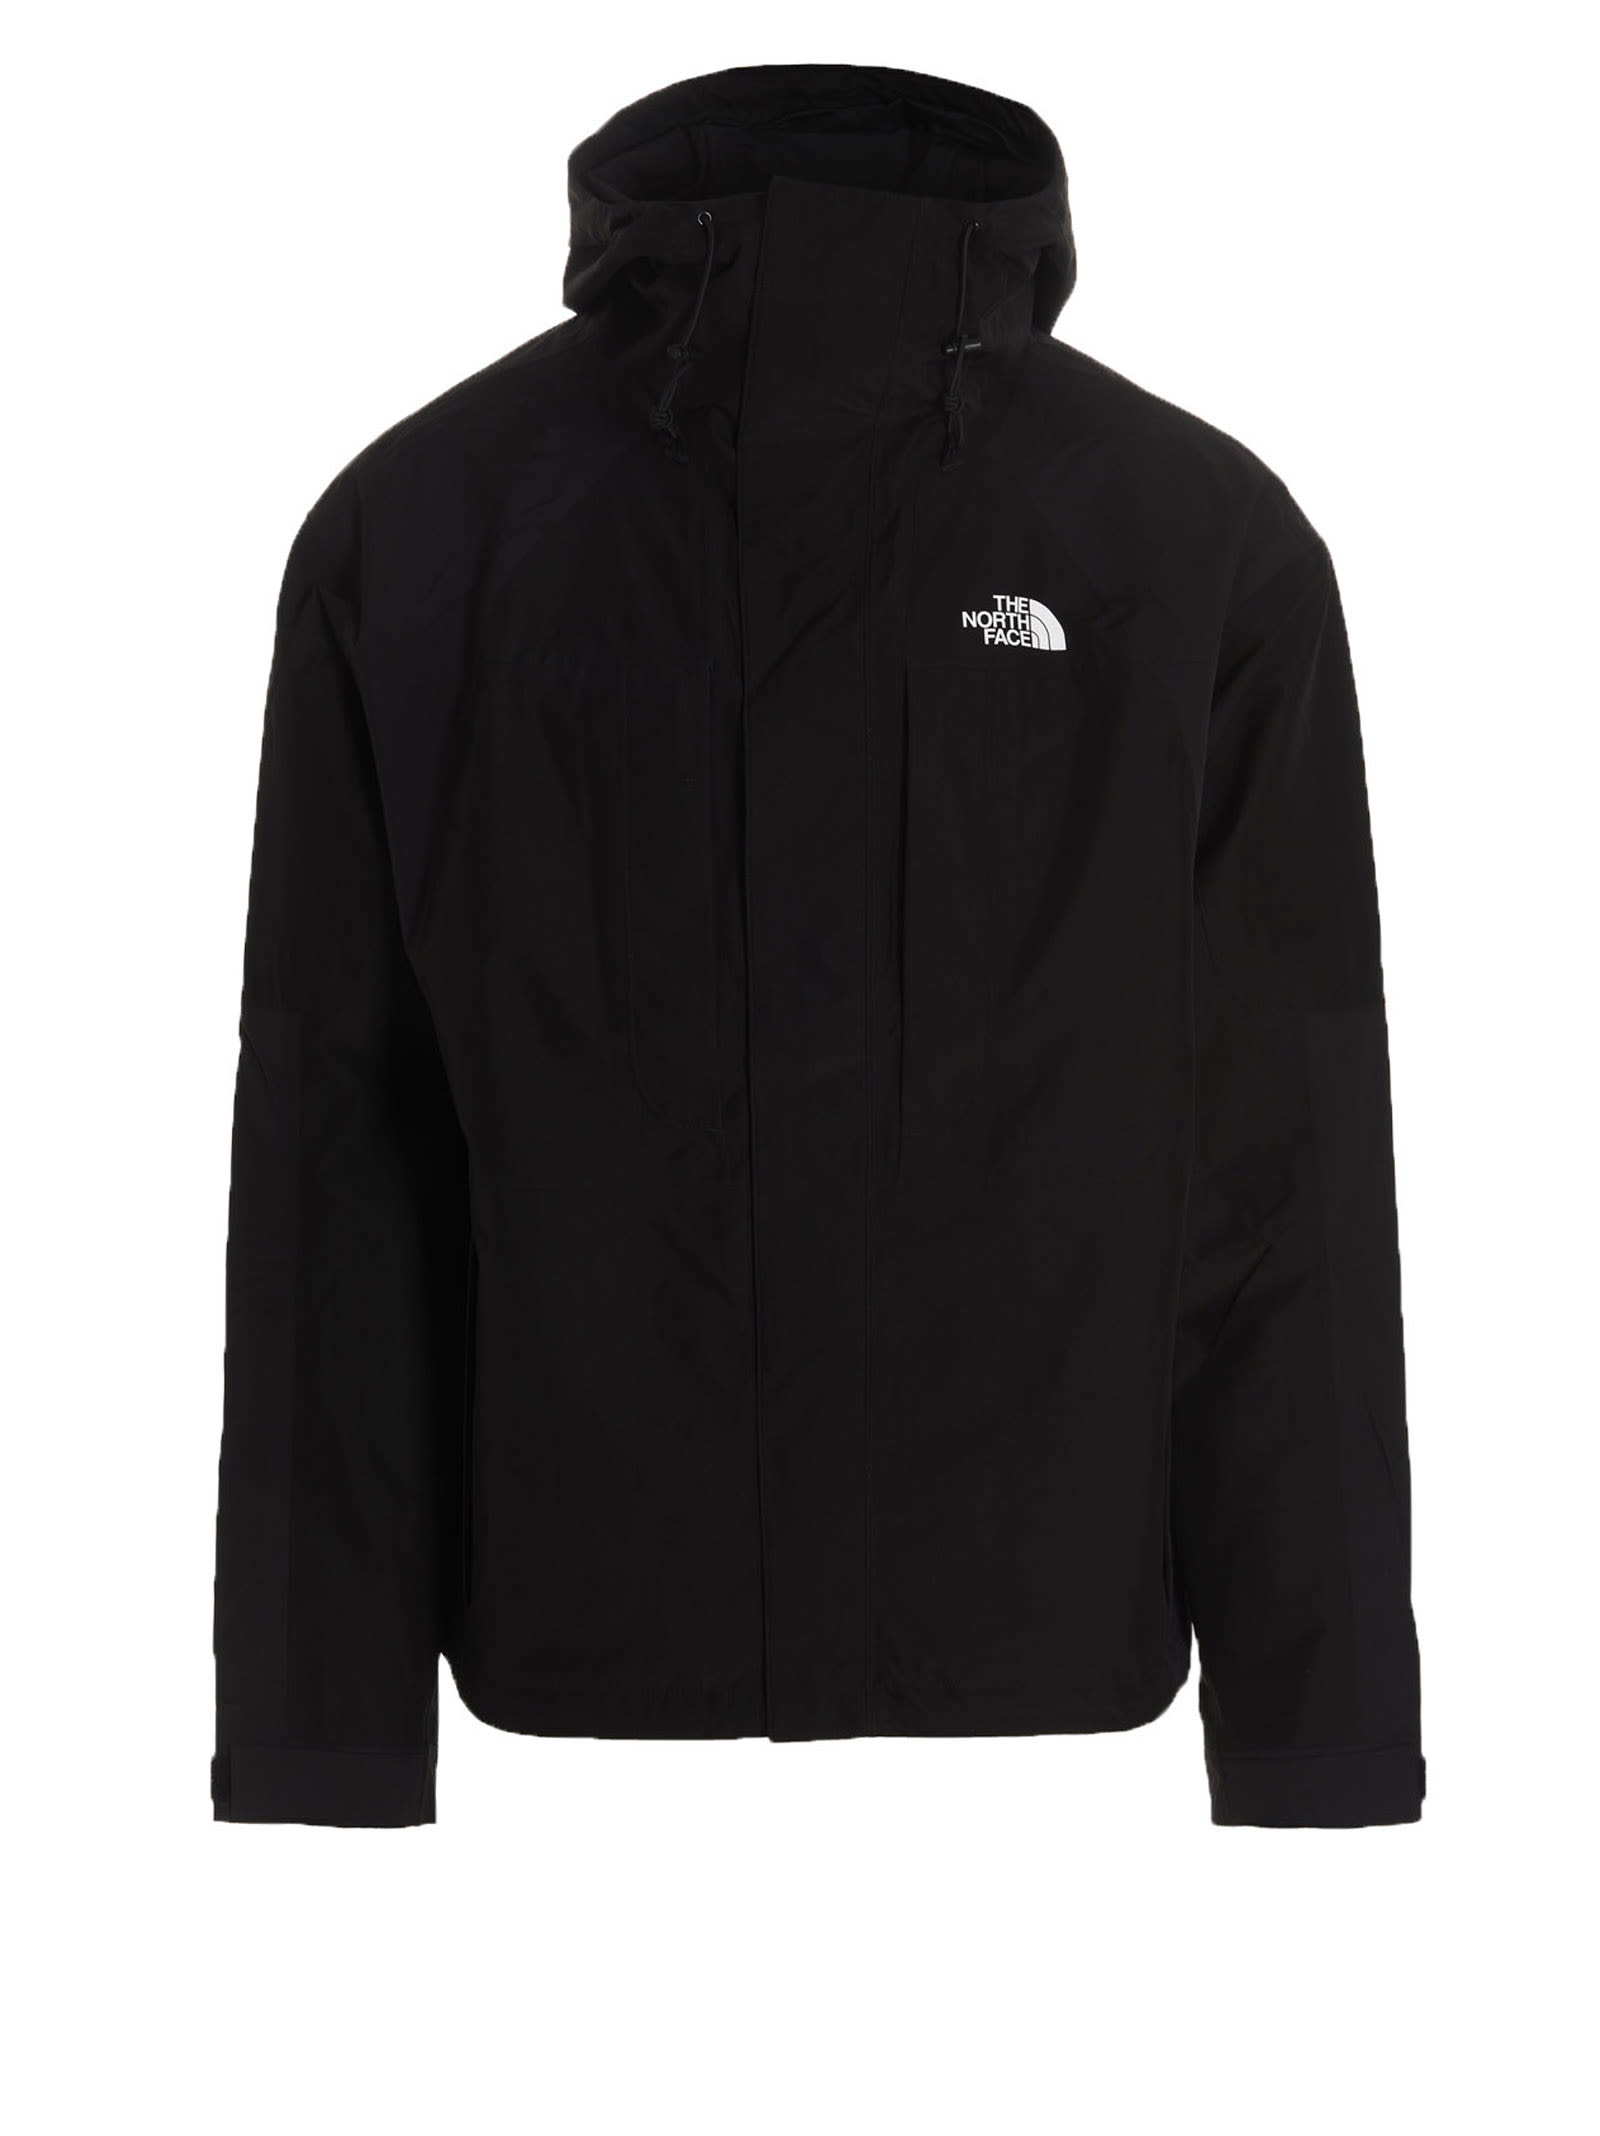 THE NORTH FACE Jackets for Men | ModeSens